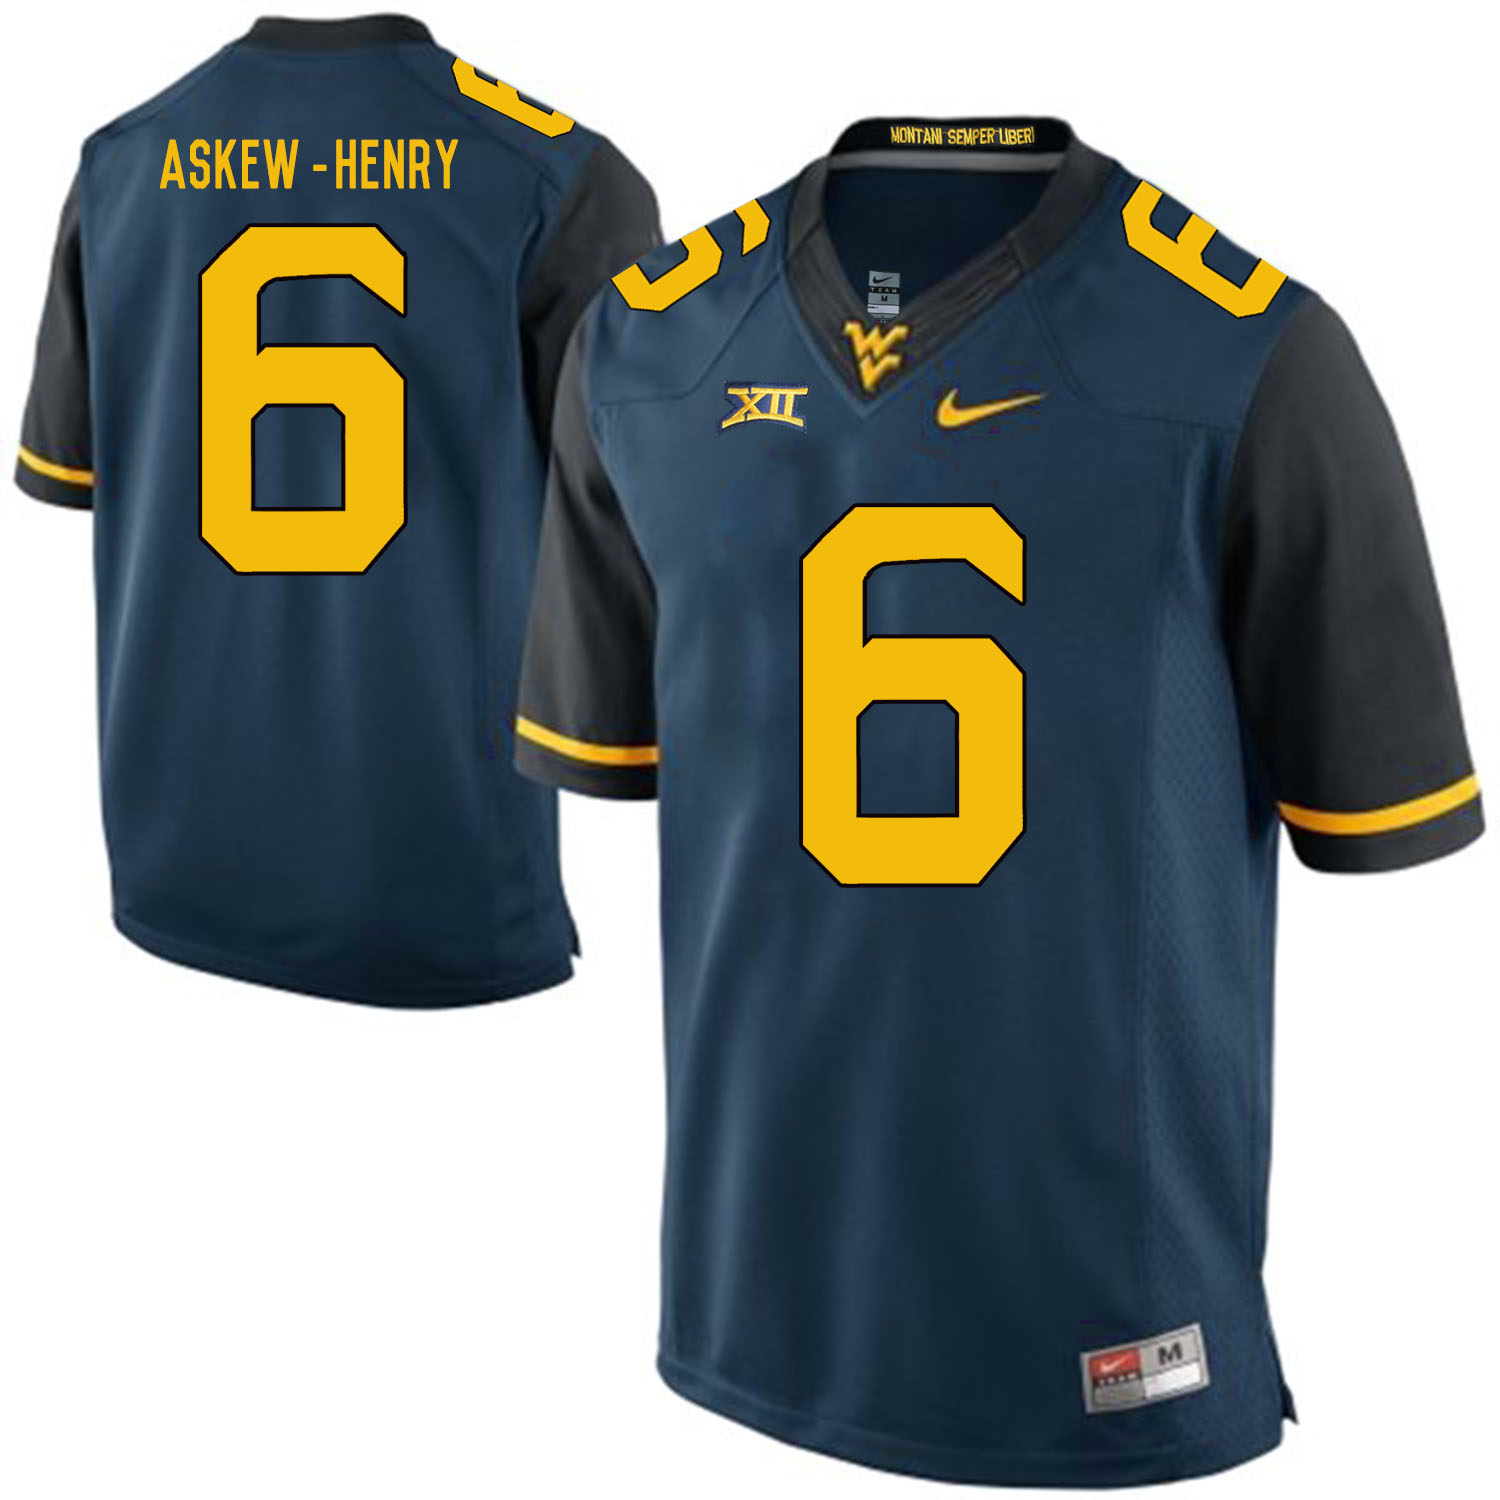 West Virginia Mountaineers 6 Dravon Askew-Henry Blue College Football Jersey